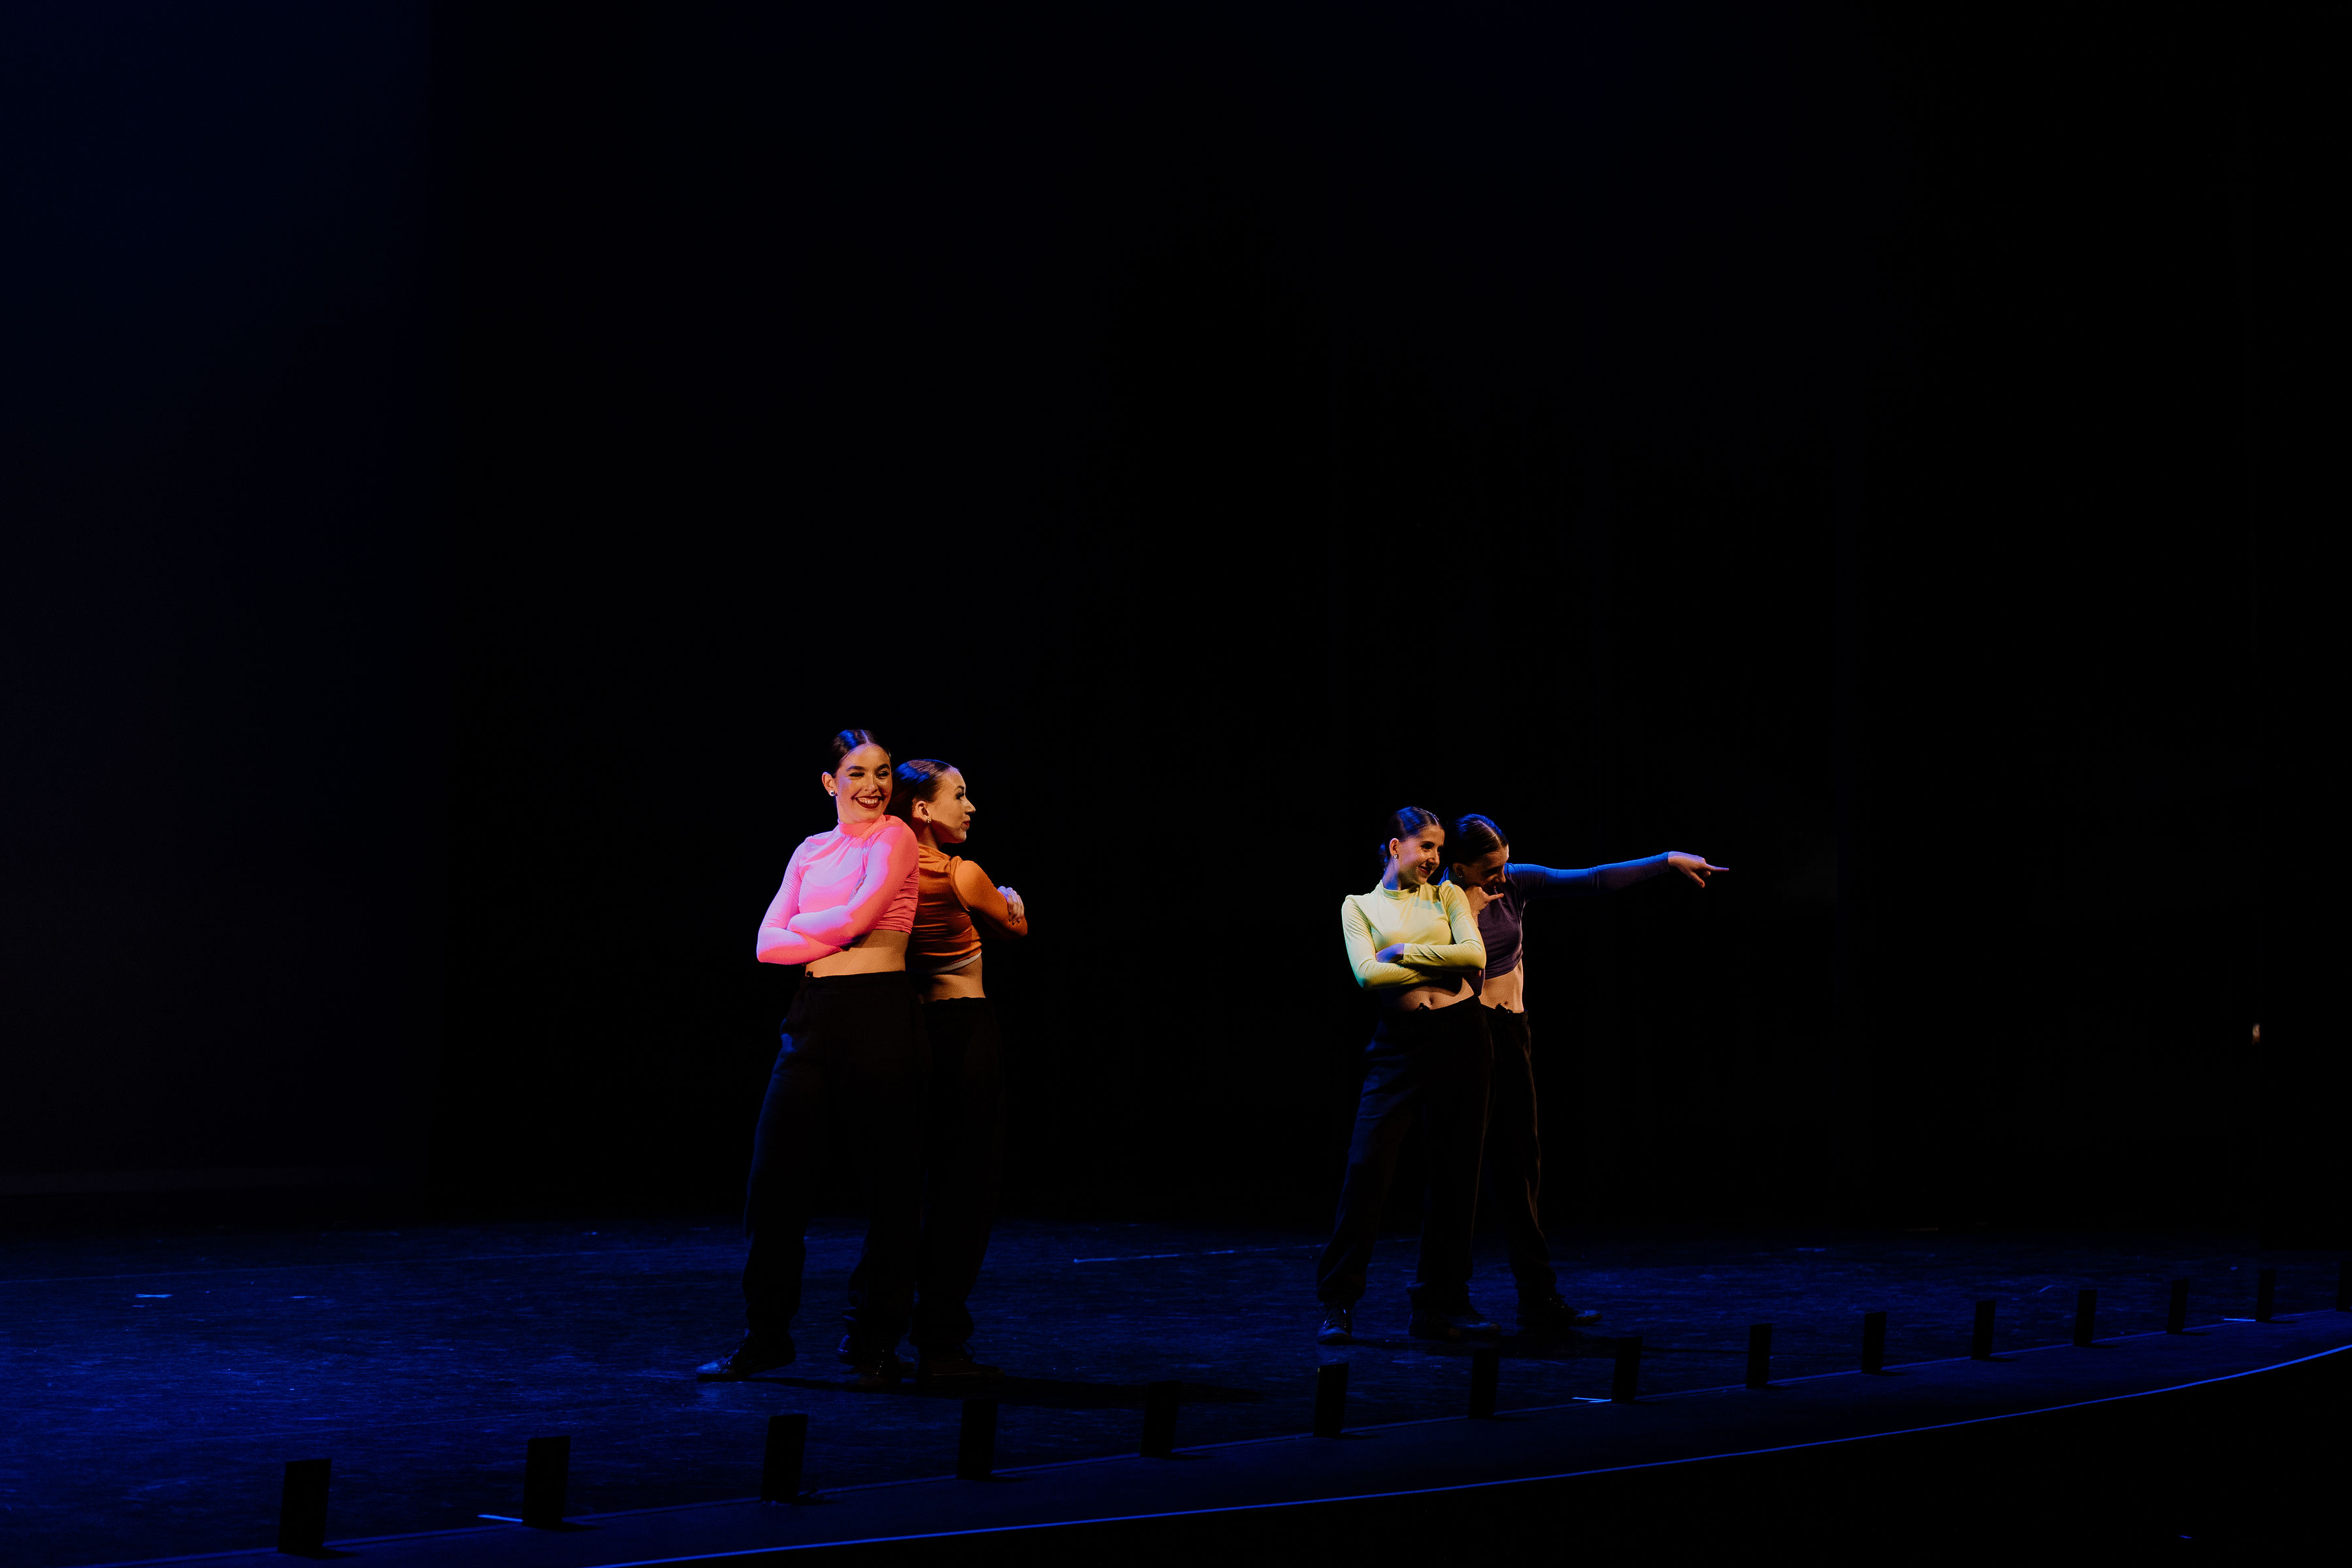 Four dancers performing a hip hop routine on stage